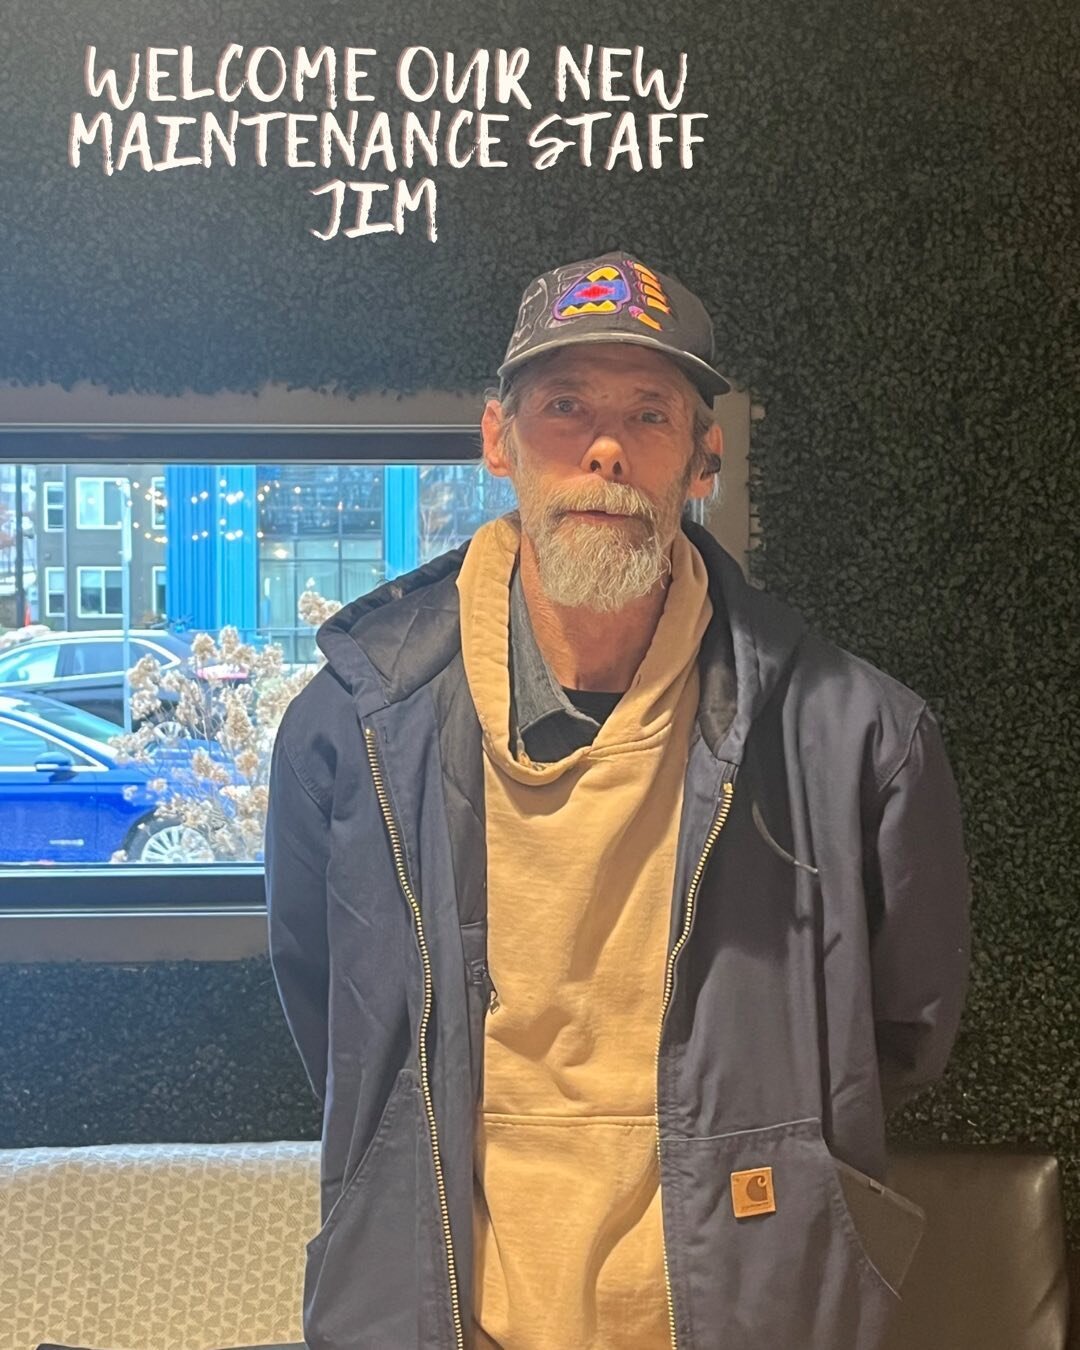 It's monday which means, it's meet the staff day! 

We welcomed Jim to the Terrace View maintenance staff last week! We are so excited to have him here with us! 

Jim enjoys sprite, time with his family, and working! Stop and say Hi to Jim if you see